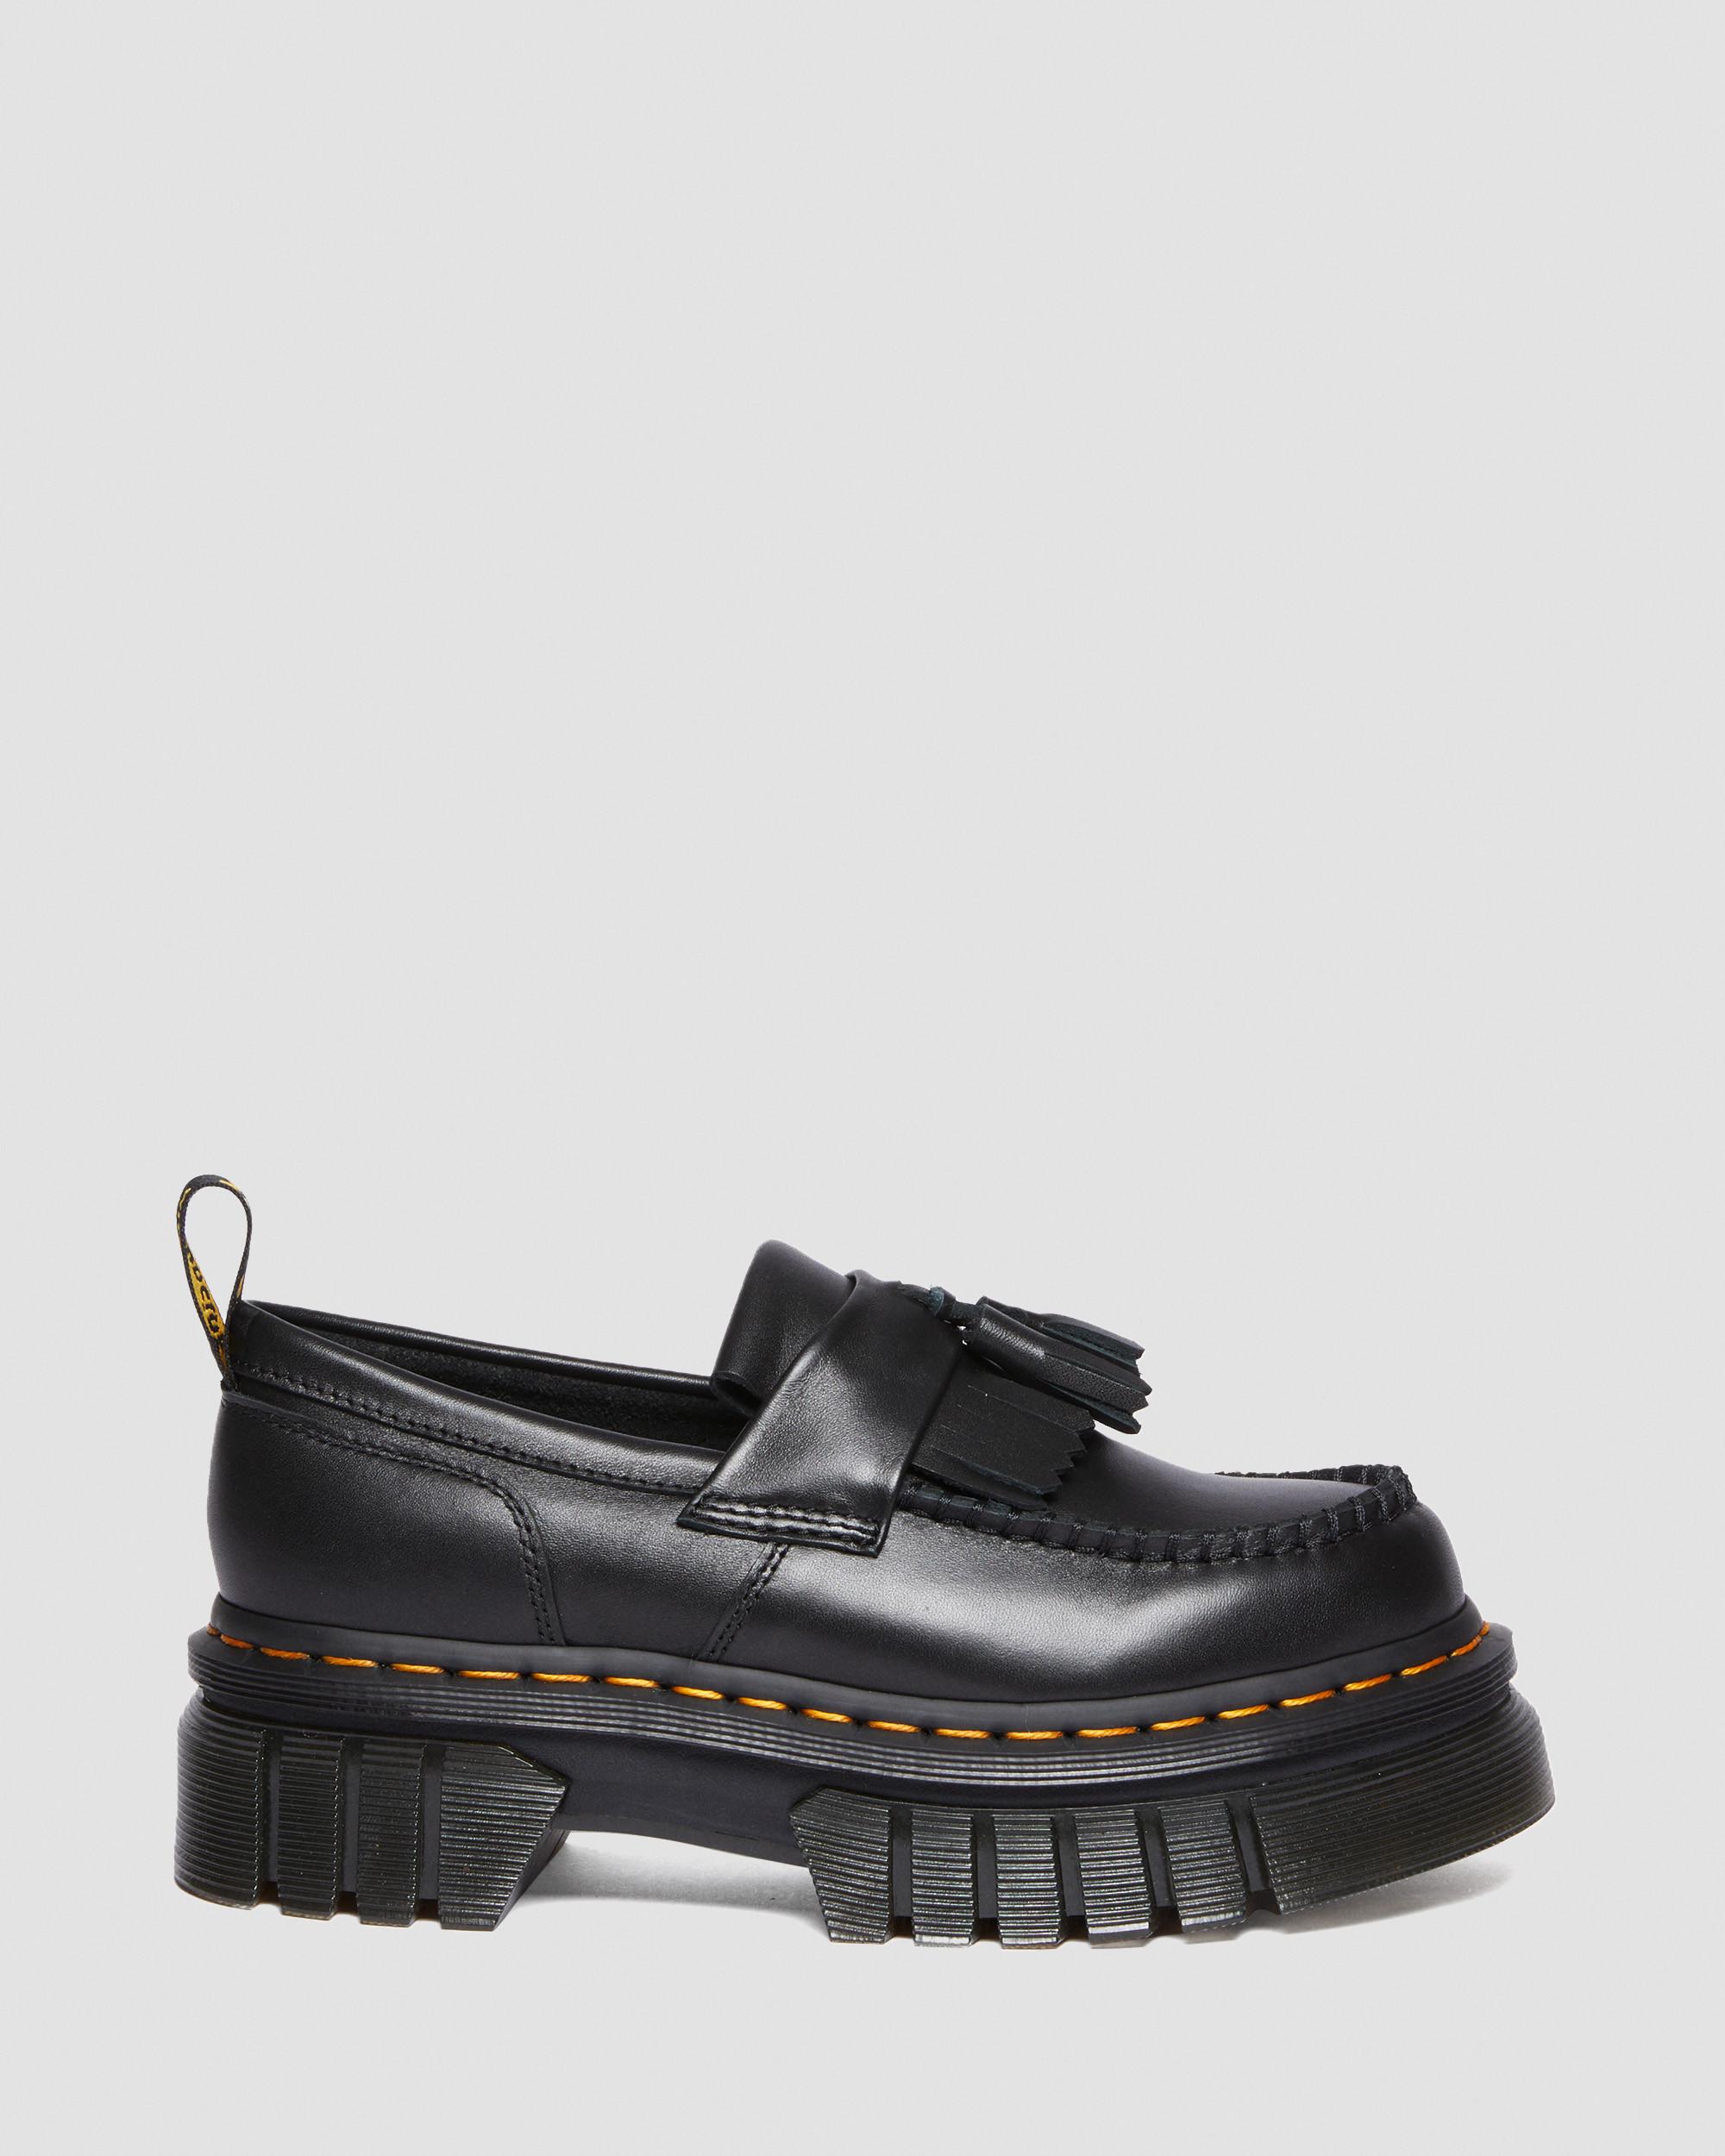 Audrick Nappa Lux Plateau LoaferAudrick Nappa Lux Plateau Loafer Dr. Martens